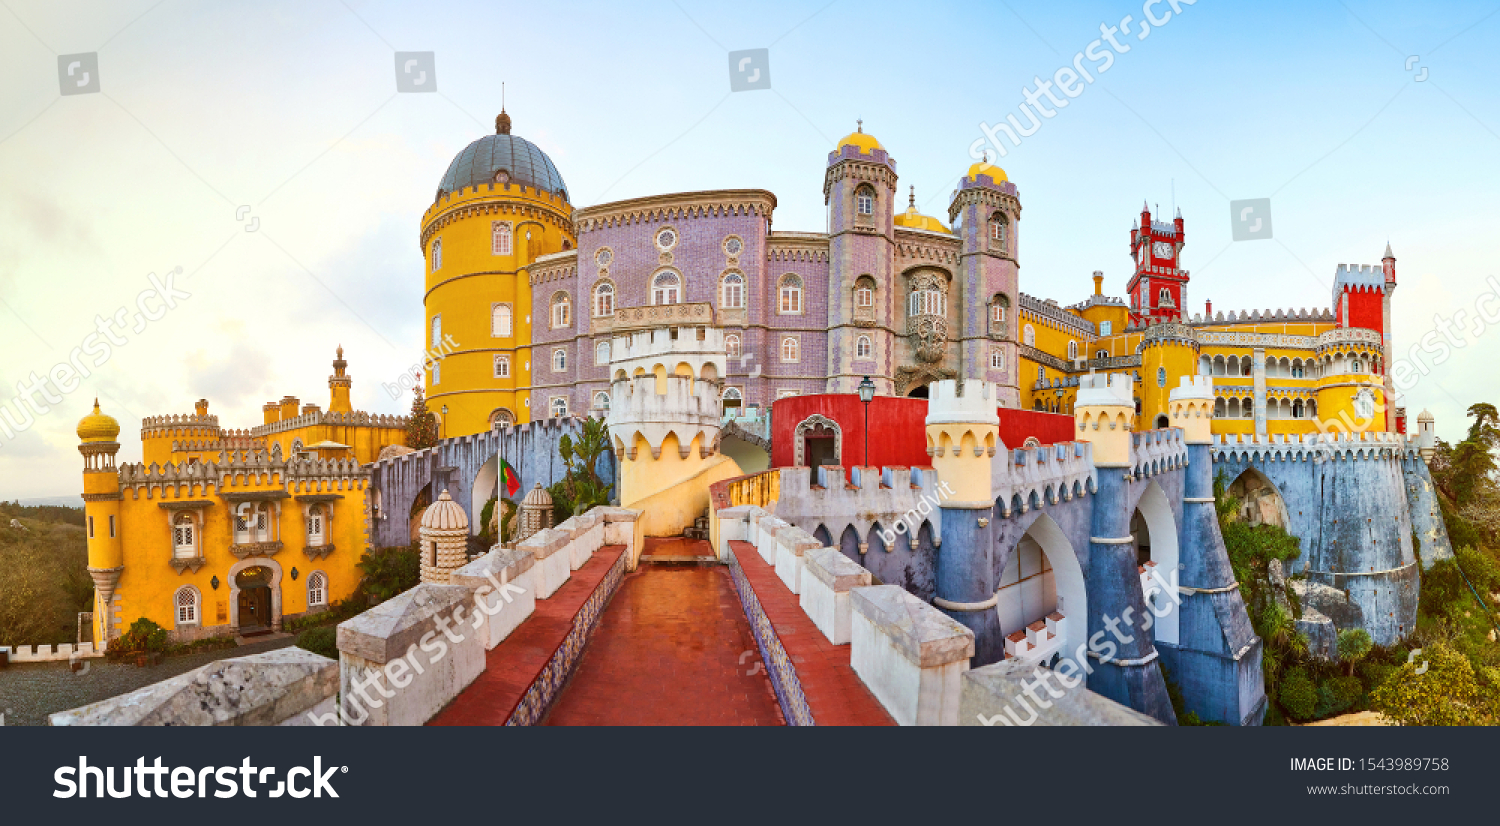 Pena Palace in Sintra, Lisbon, Portugal. Famous landmark. Most beautiful castles in Europe #1543989758